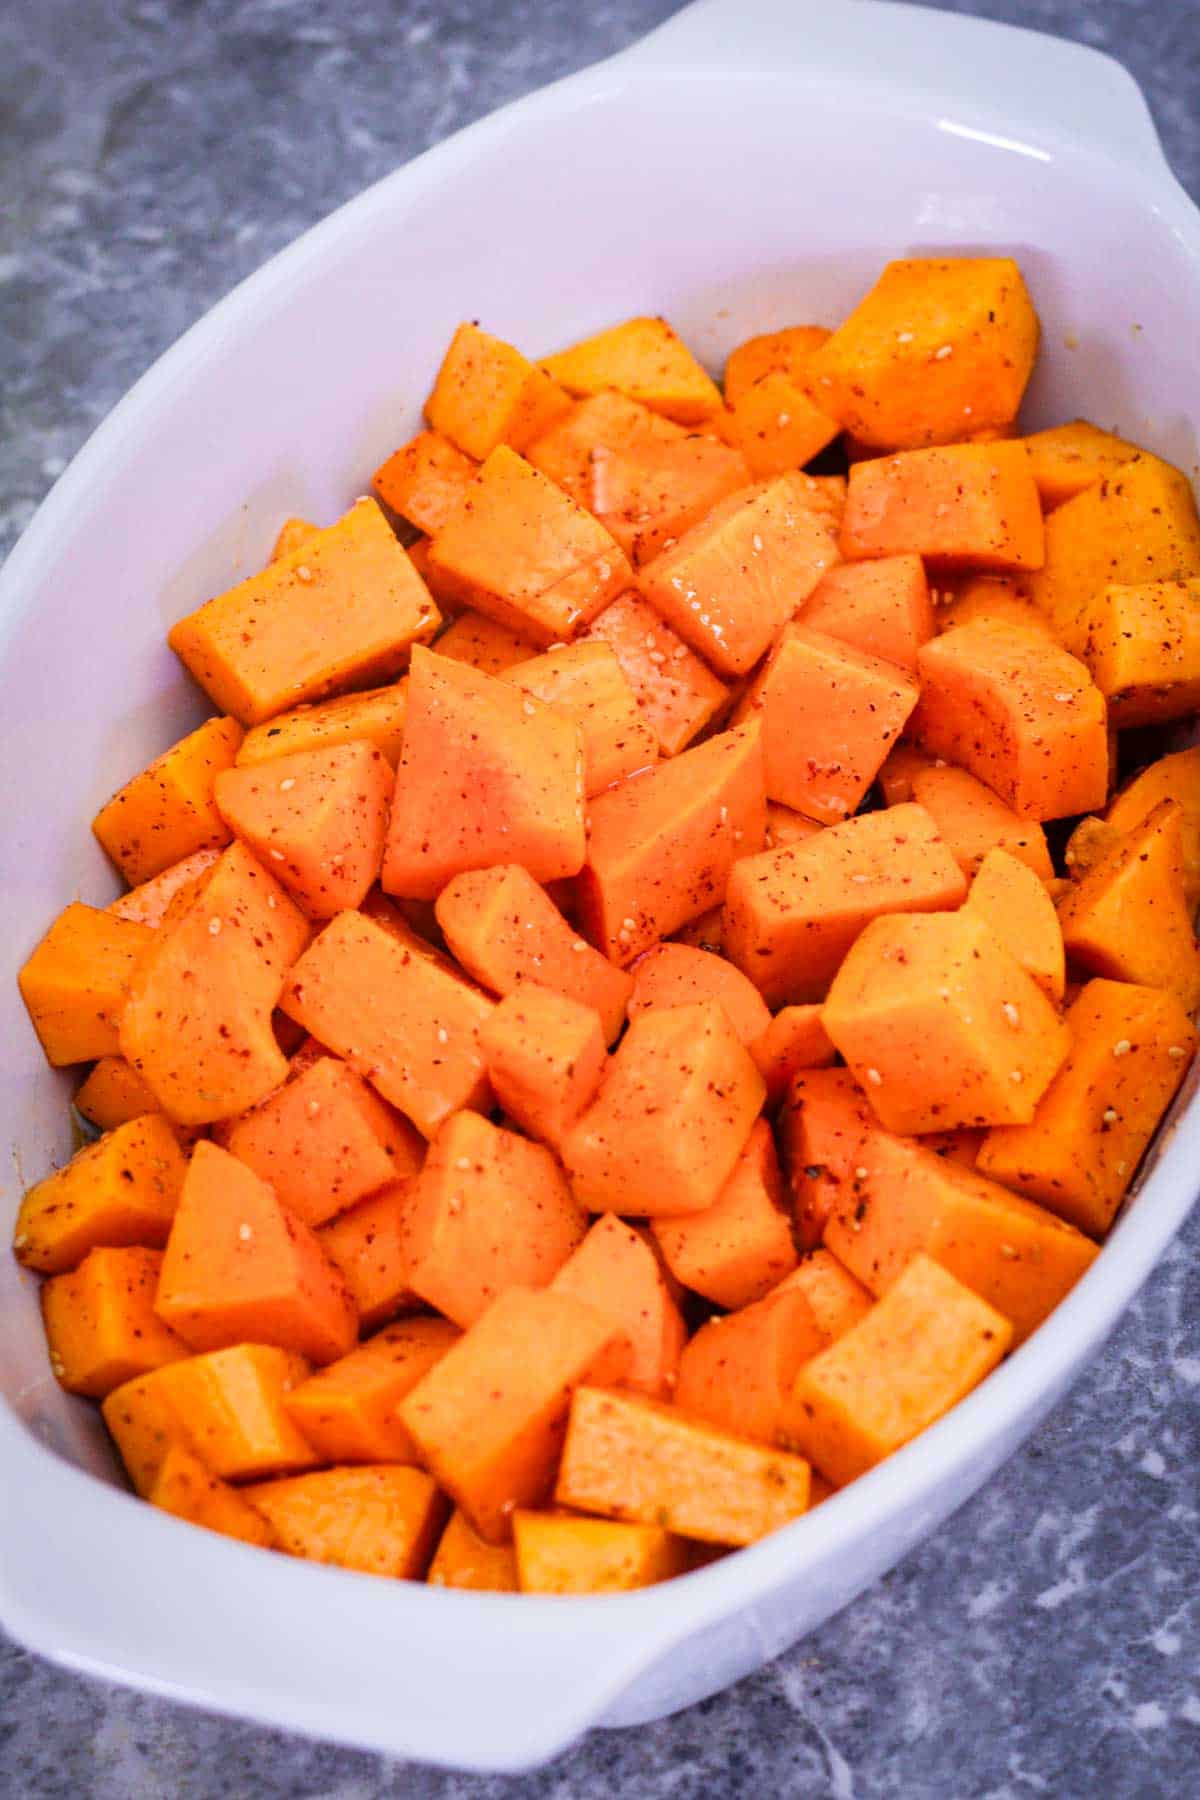 A baking dish showing marinated chunk of butternut squash, right before roasting them.